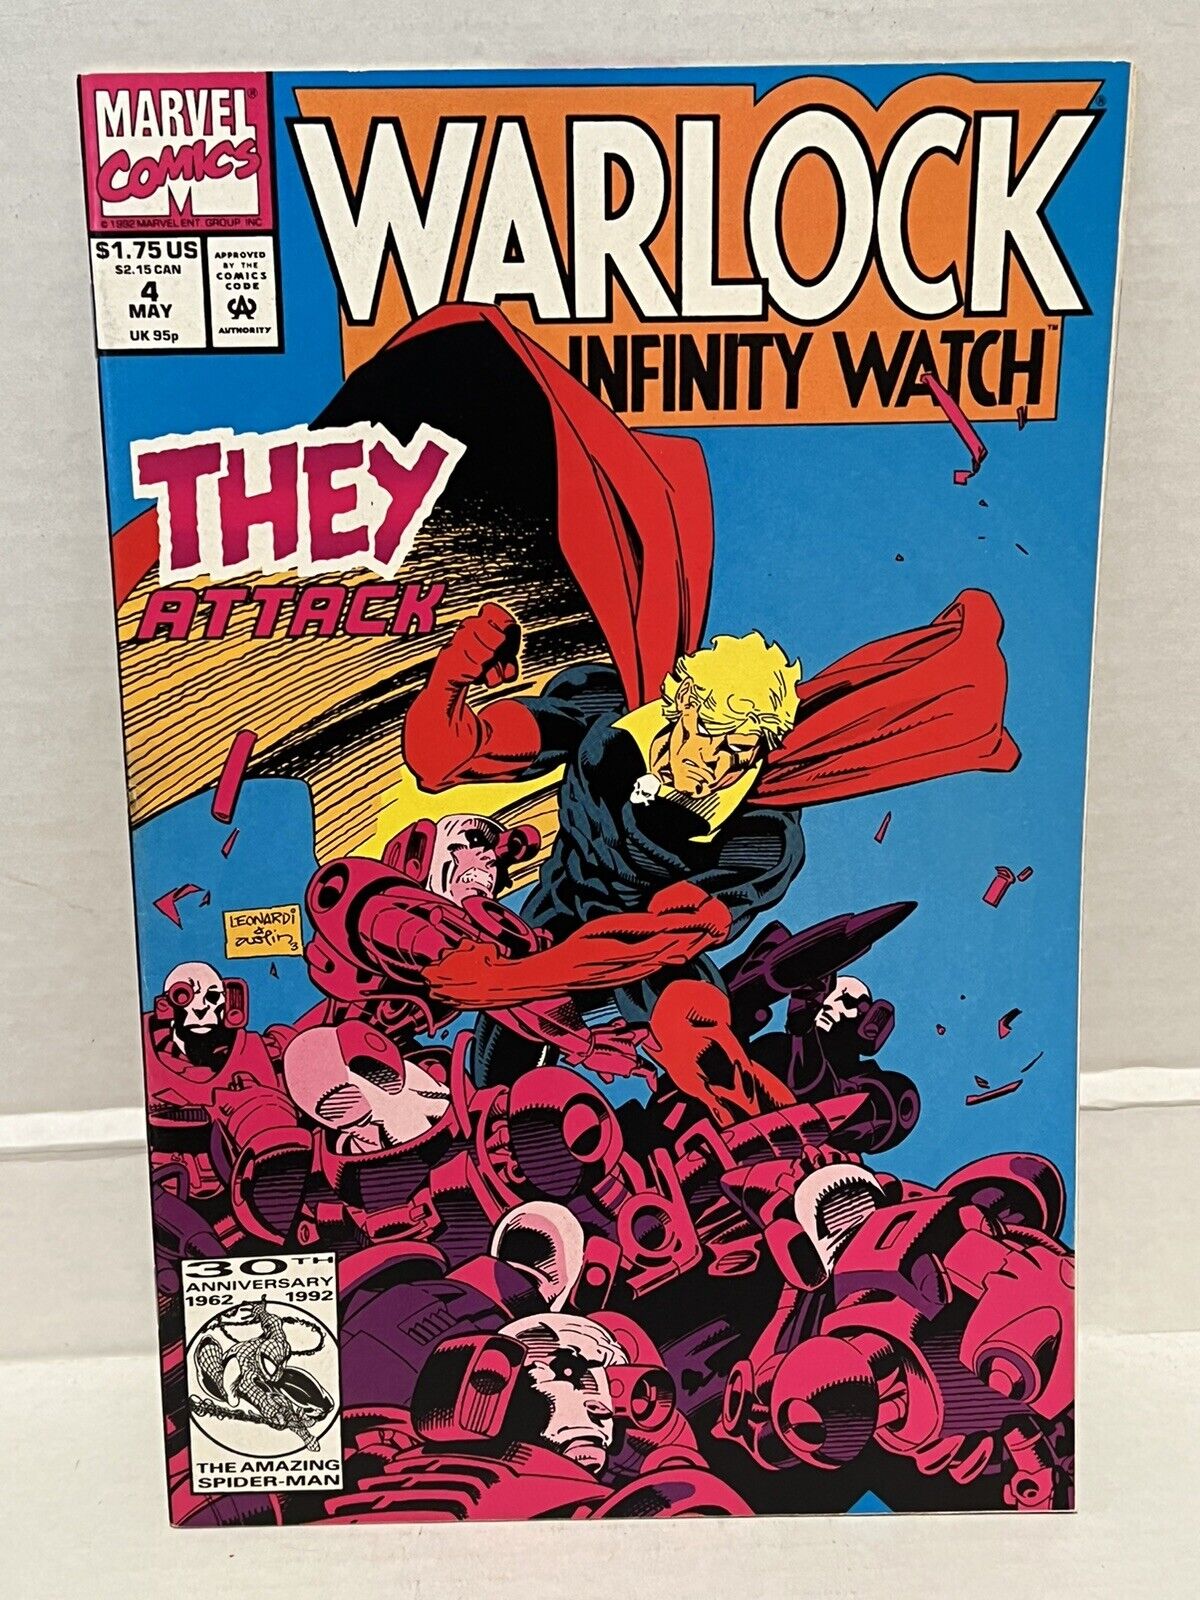 WARLOCK AND THE INFINITY WATCH THEY ATTACK MAY #4 MARVEL 1992 COMIC BOOK